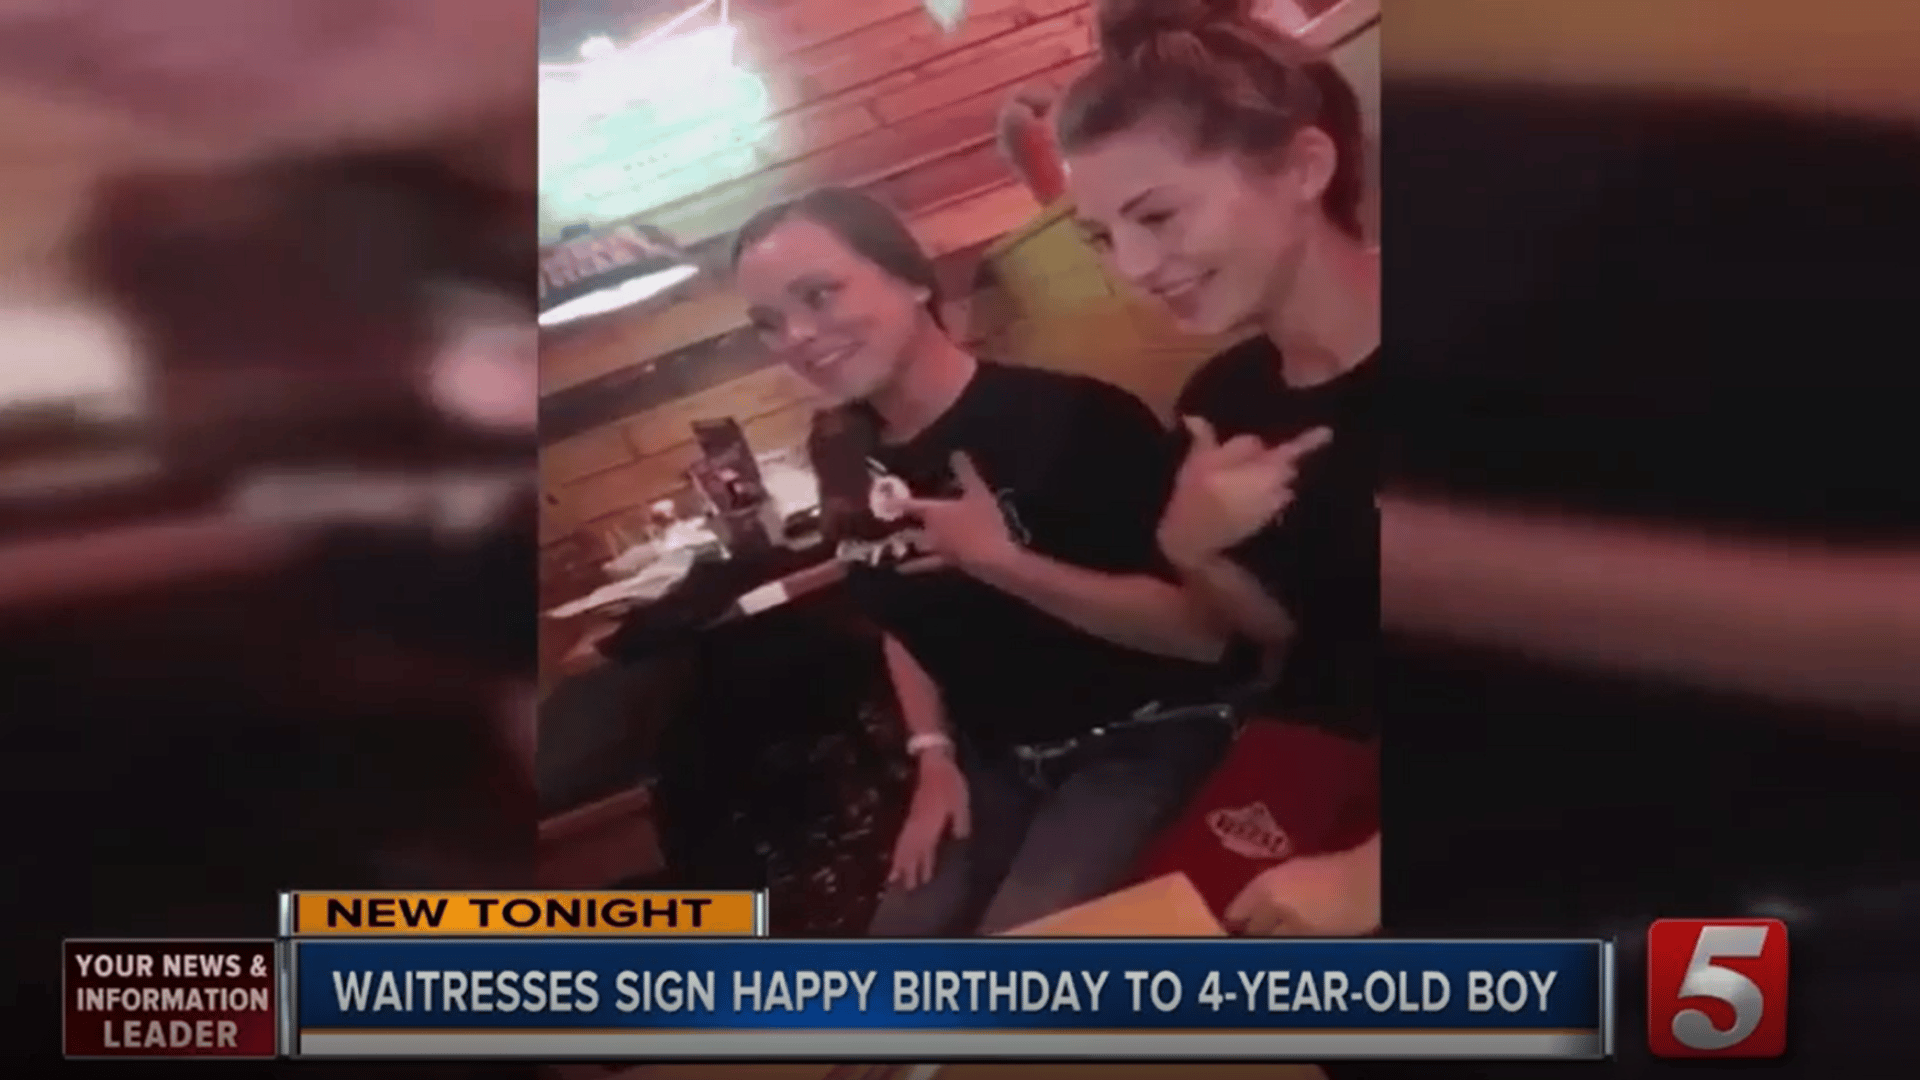 Restaurant Servers Learn Sign Language and Sign Happy Birthday to a Deaf Boy